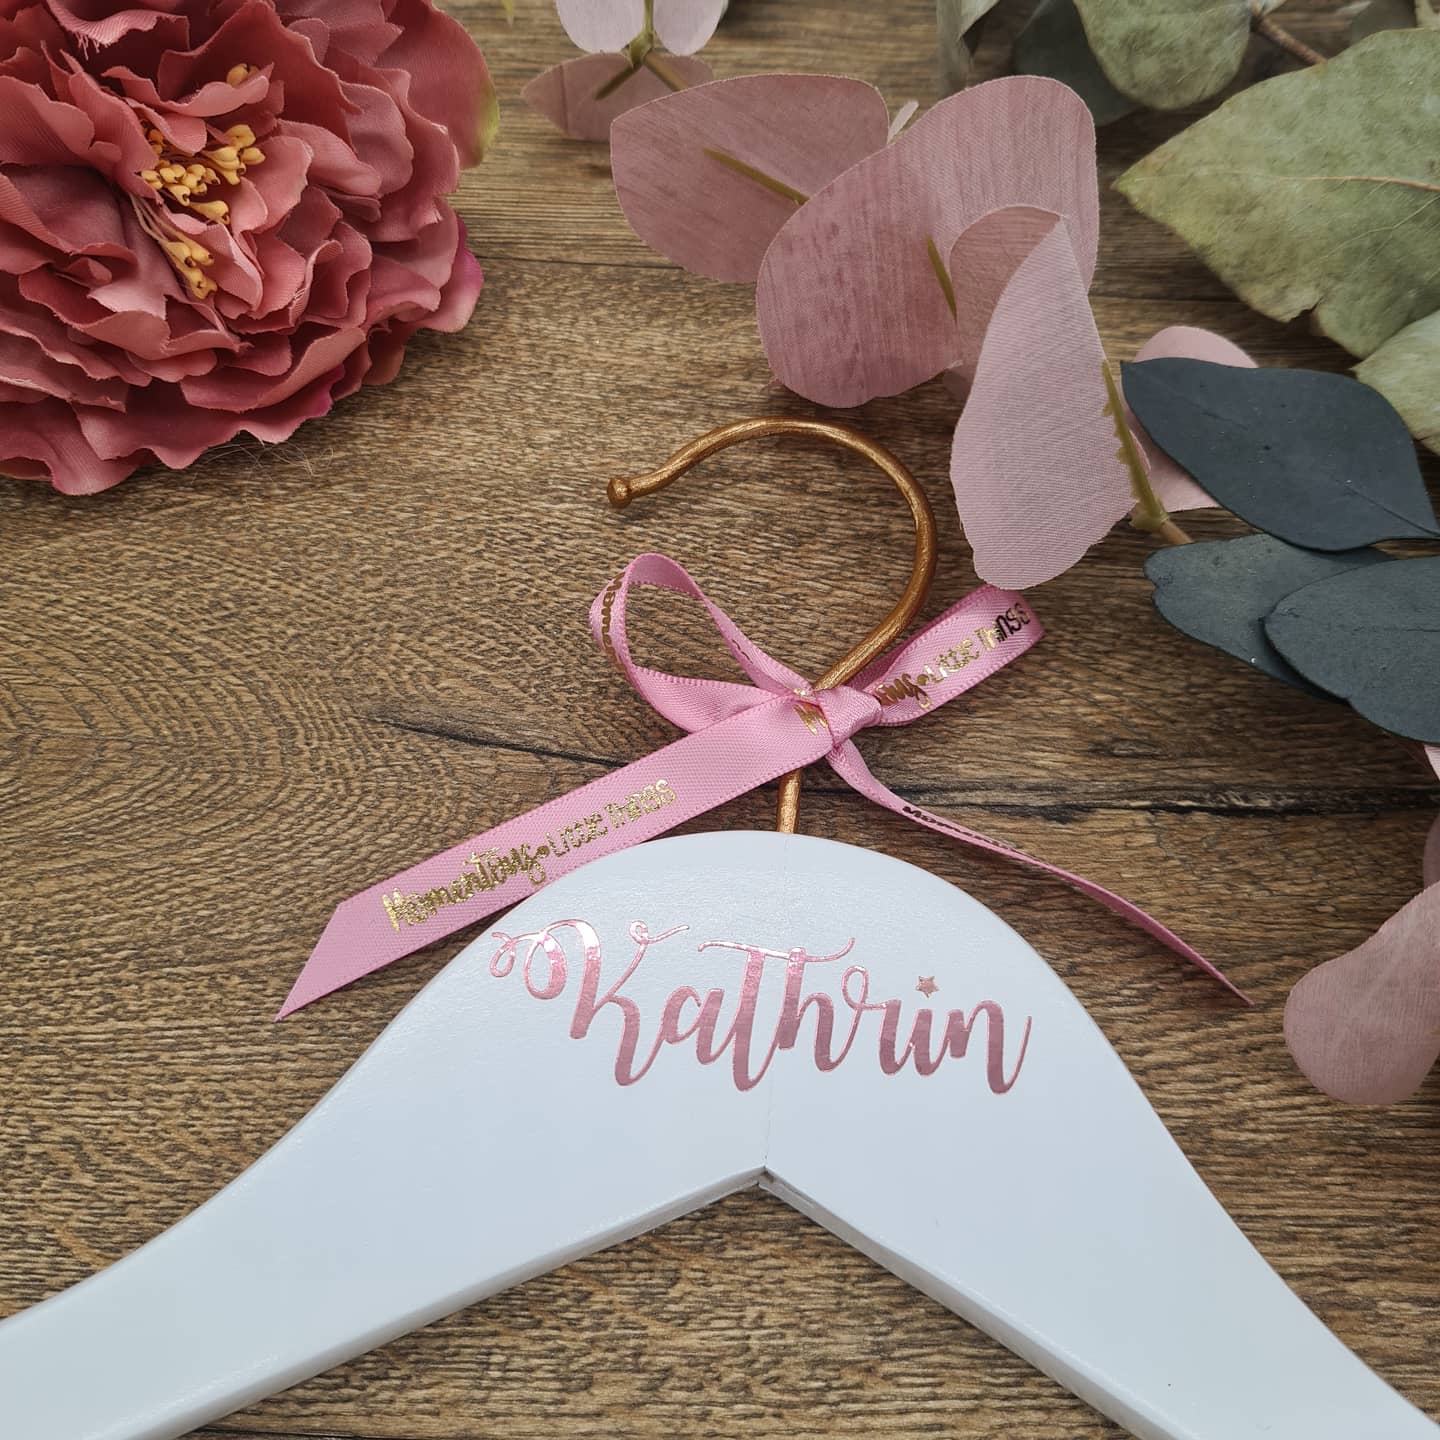 Copper & White Wedding Hanger with ROSE GOLD Name